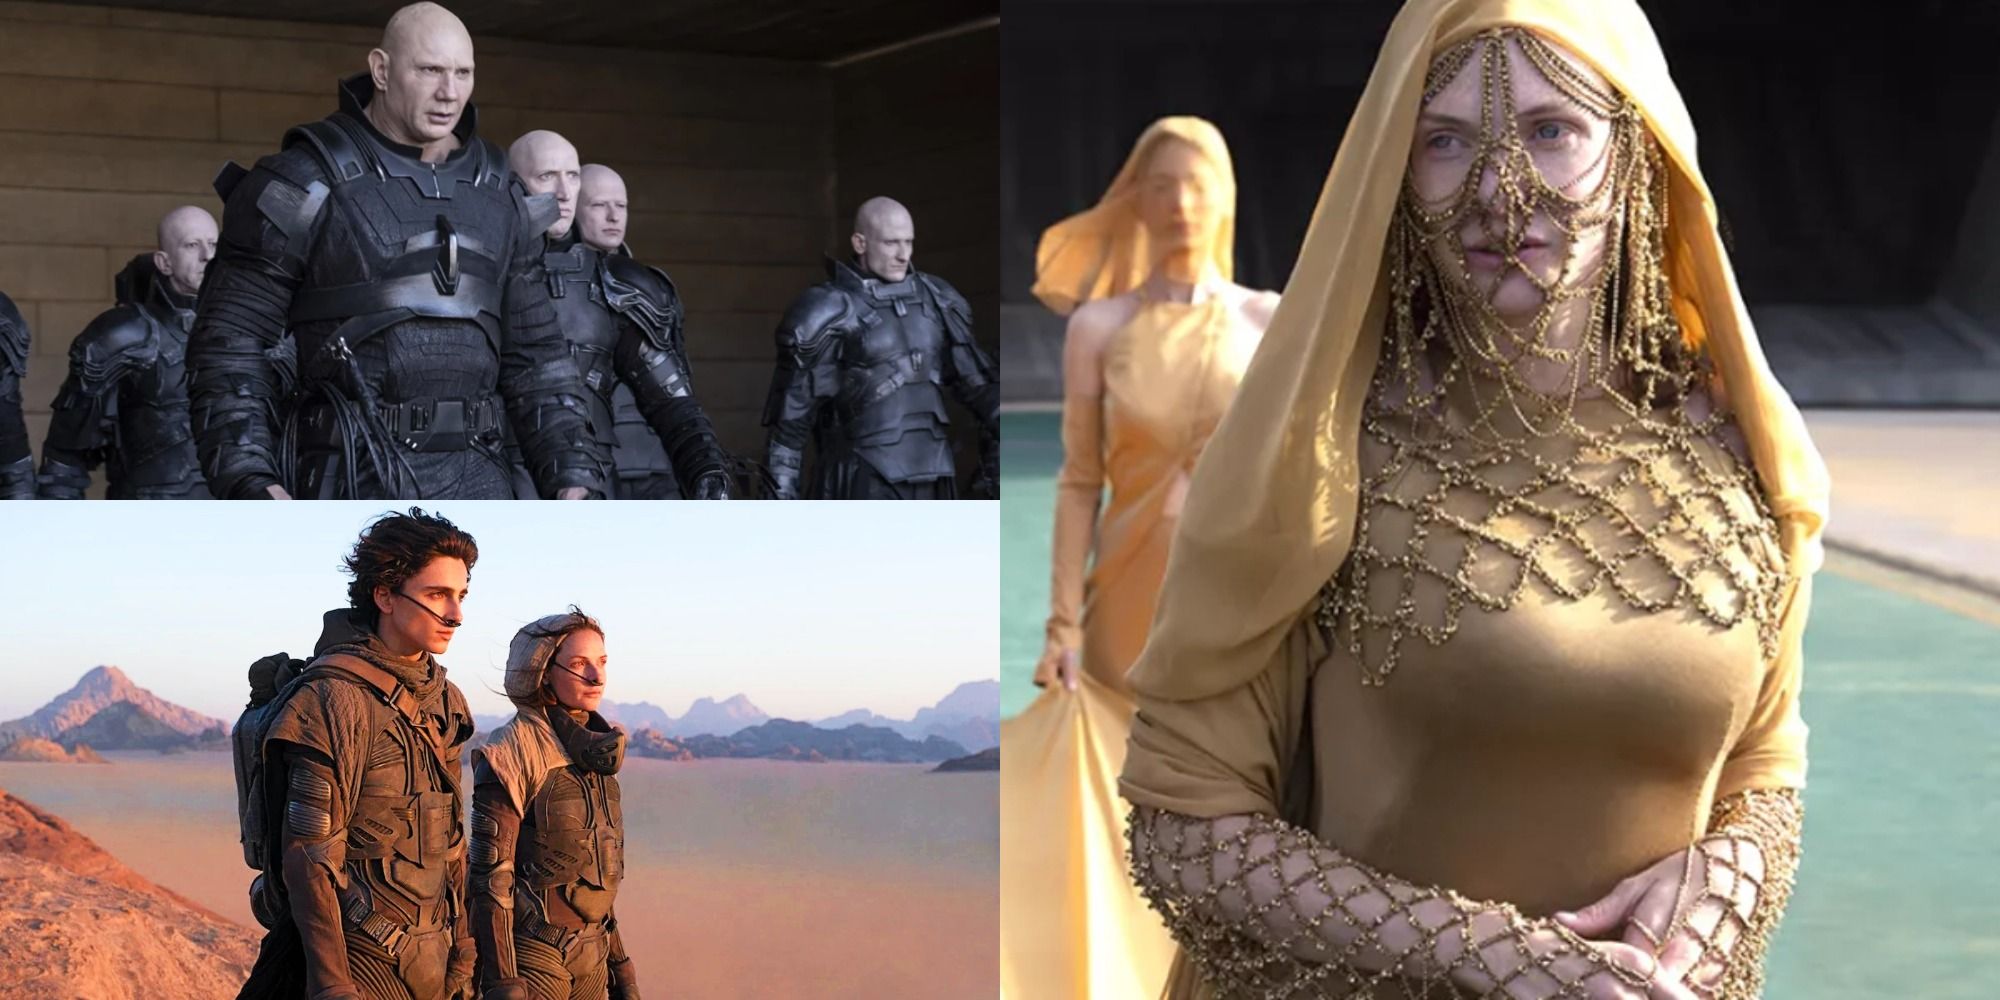 Dune 2021 10 Hidden Details In The Costumes You May Not Have Noticed